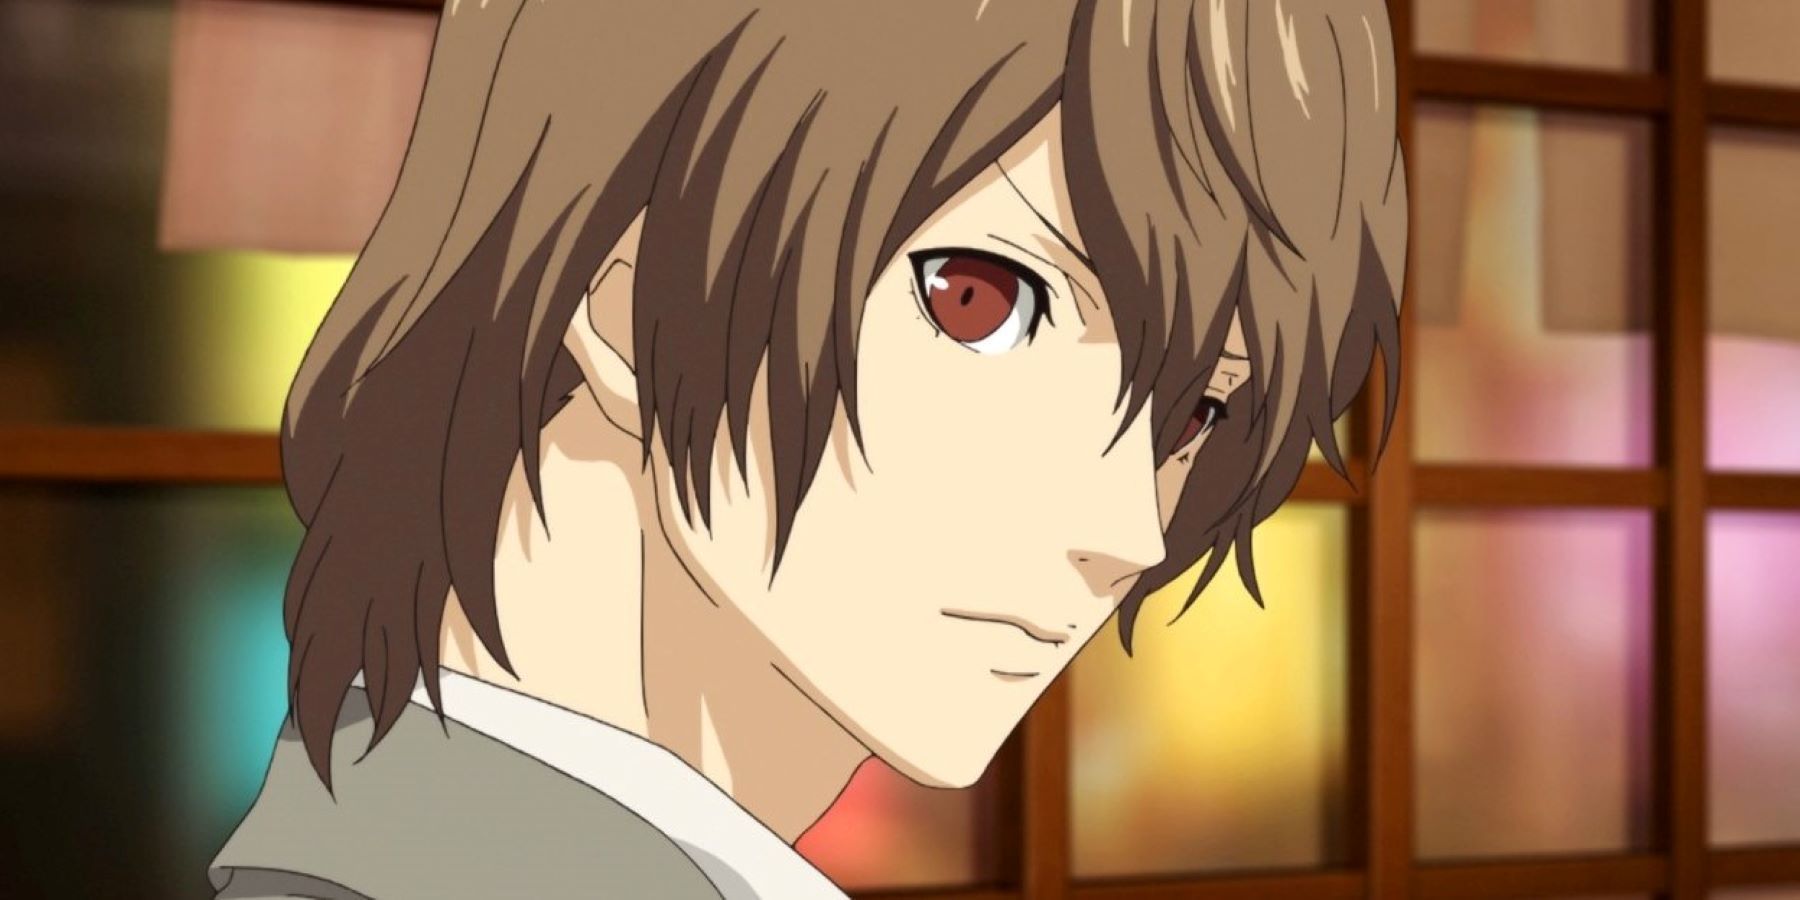 Goro Akechi looking over his shoulder sternly in the Persona 5 anime